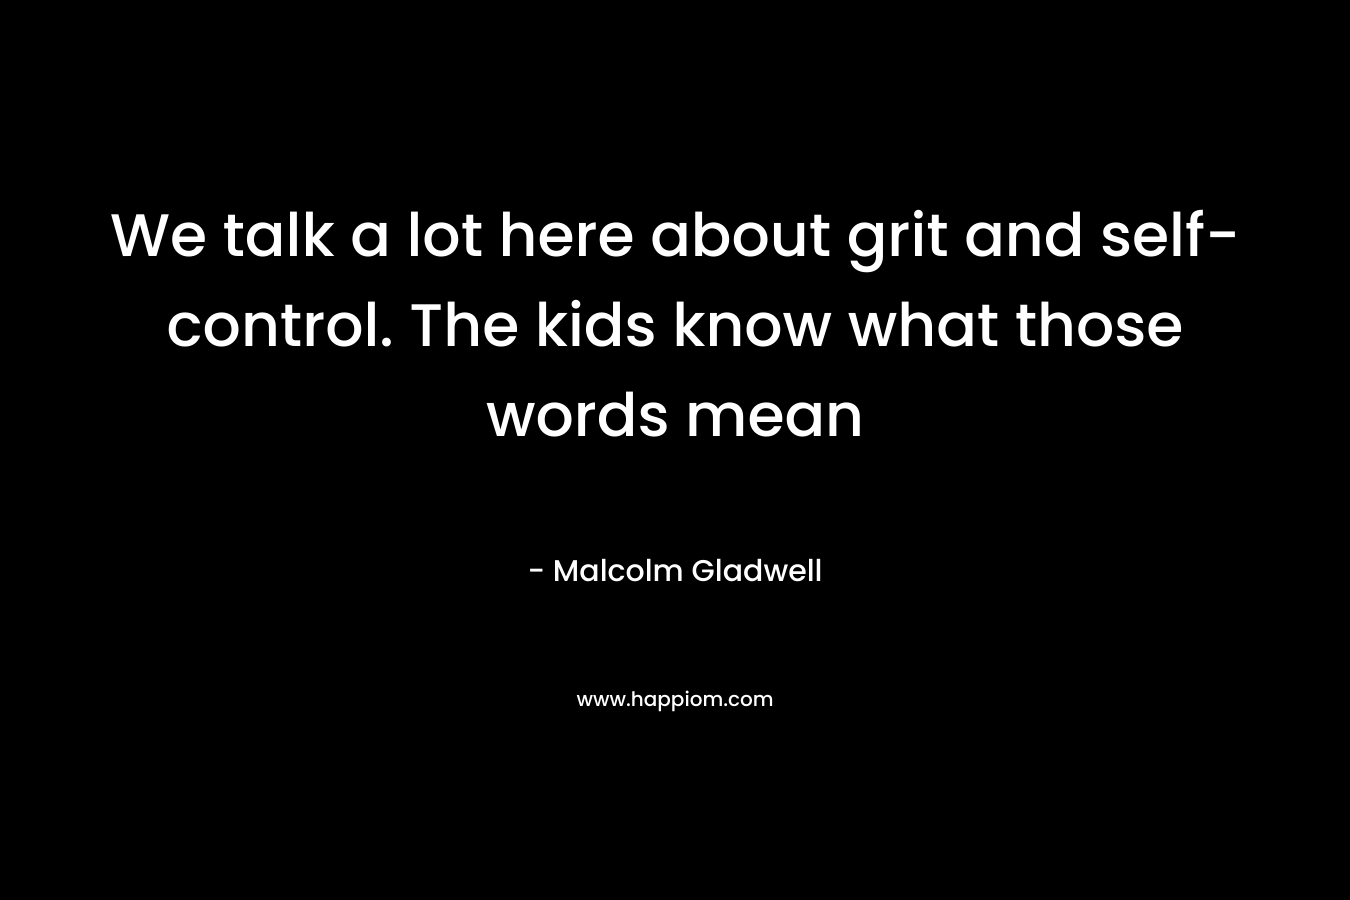 We talk a lot here about grit and self-control. The kids know what those words mean